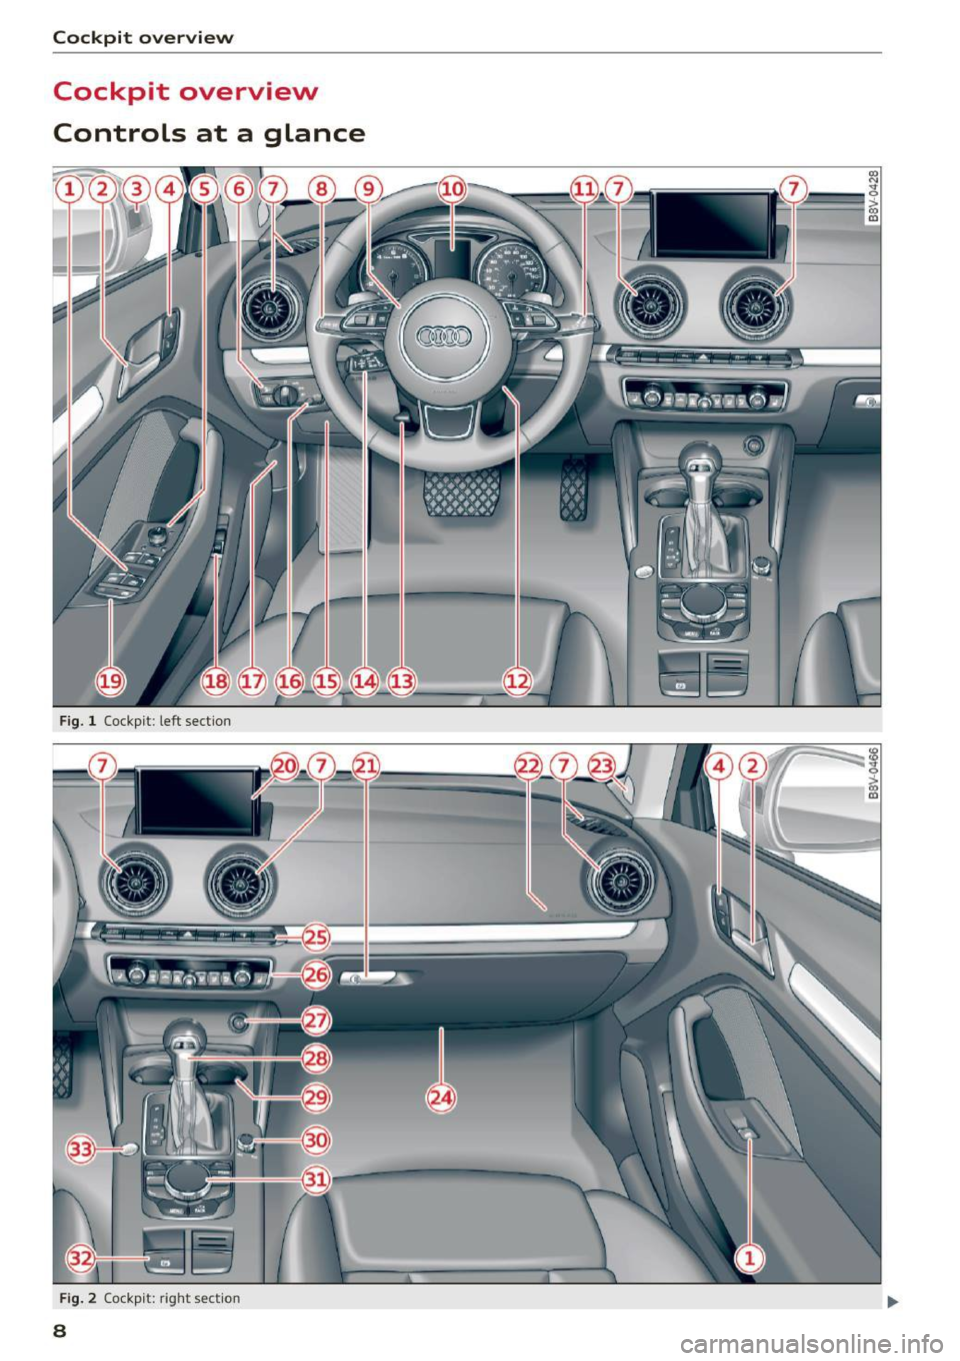 AUDI S3 SEDAN 2015  Owners Manual Cockpit  overview 
Cockpit  overview 
Controls  at  a  glance 
Fig.  1 Cockpit : left  sect ion 
Fig.  2  Cockpit:  right  sect ion 
8  